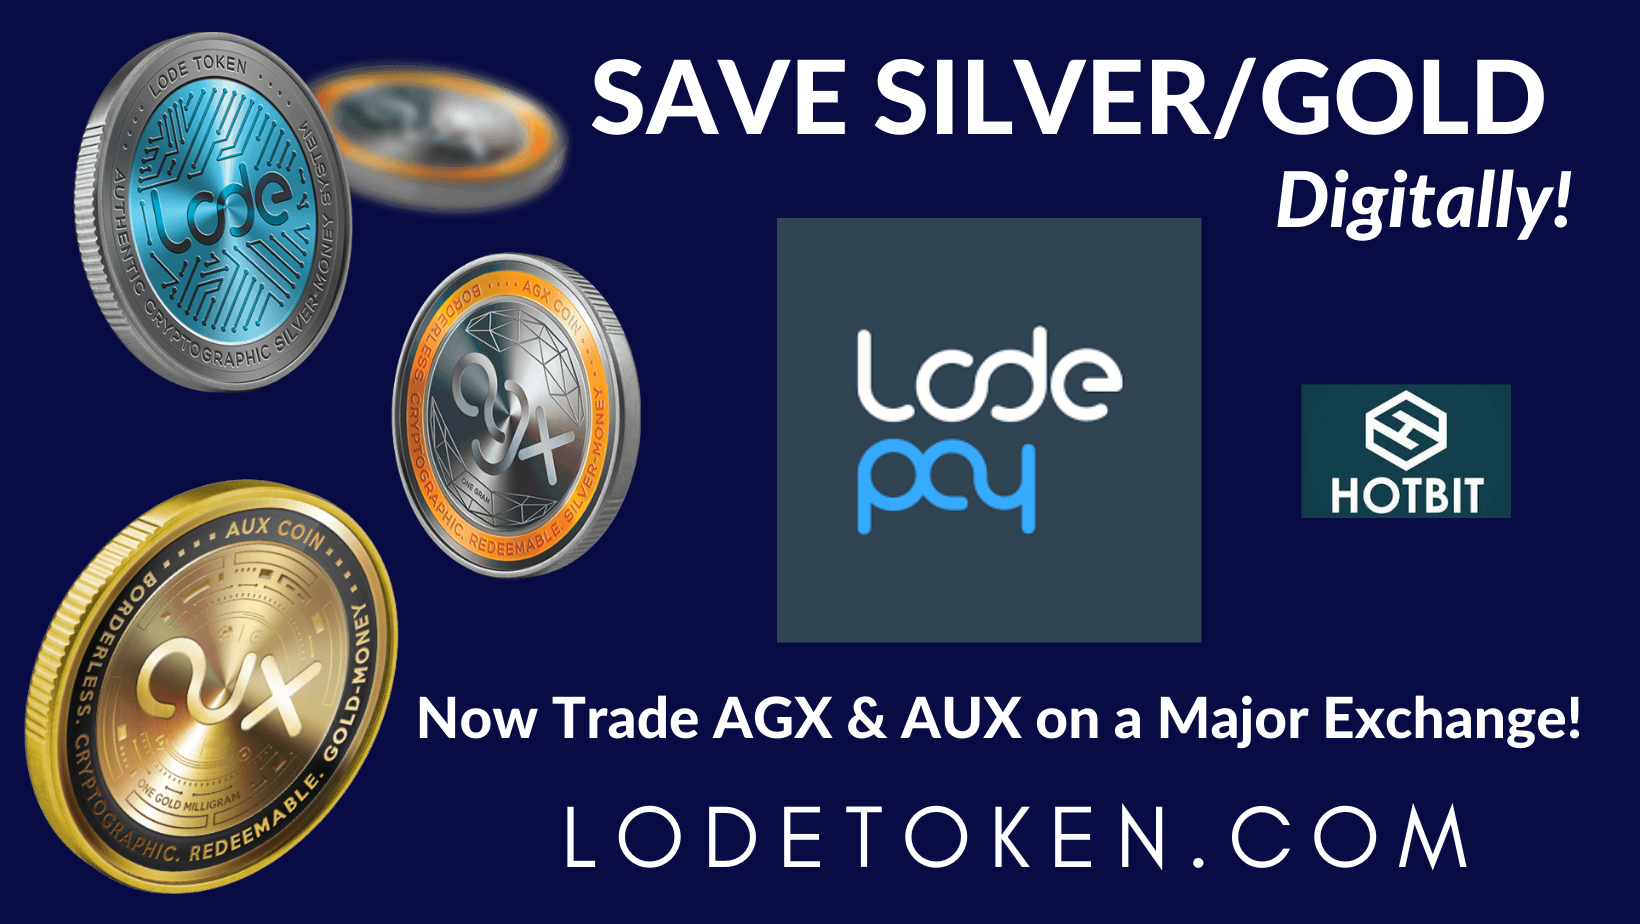 LODE ..SAVE GOLD SILVER DIGITALLY 2.0 - San Diego's Nick Canepa: "People Loved Chargers, Hated Owner"